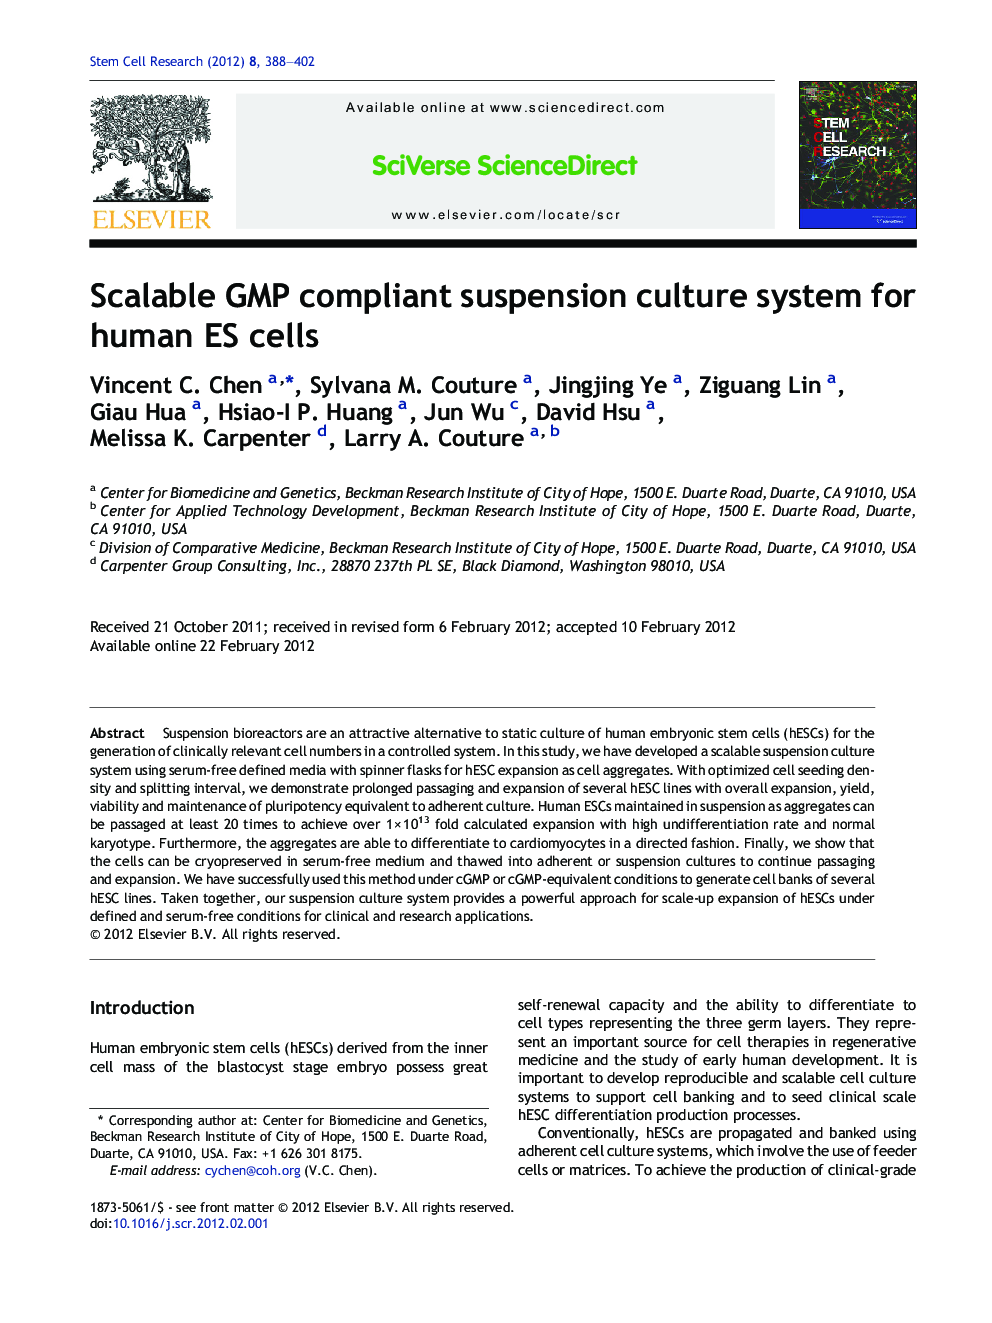 Scalable GMP compliant suspension culture system for human ES cells